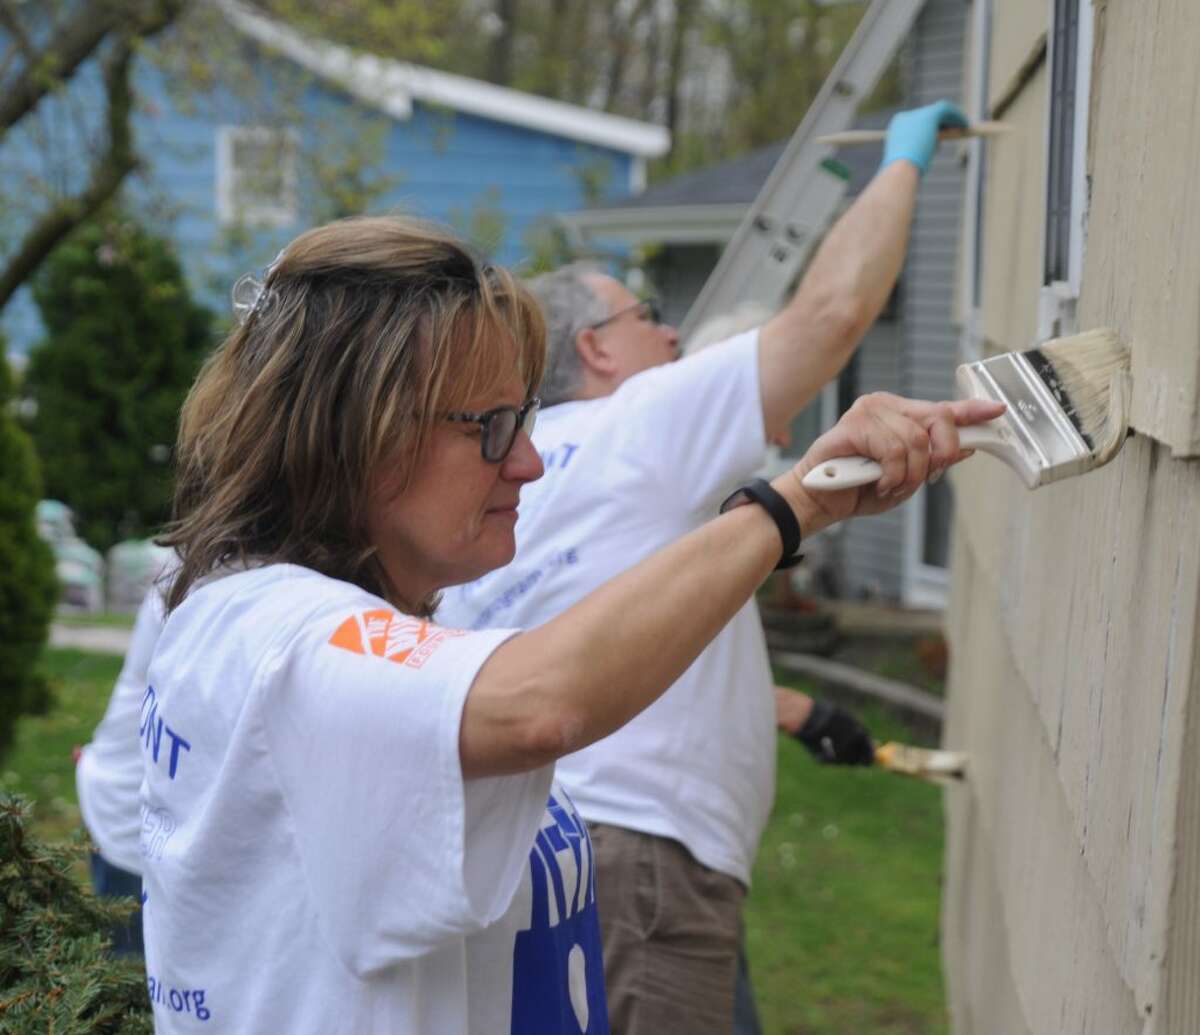 Lori Peterson painted as part of a volunteer crew fixing up a house as part of HomeFront Day on May 4, 2019.